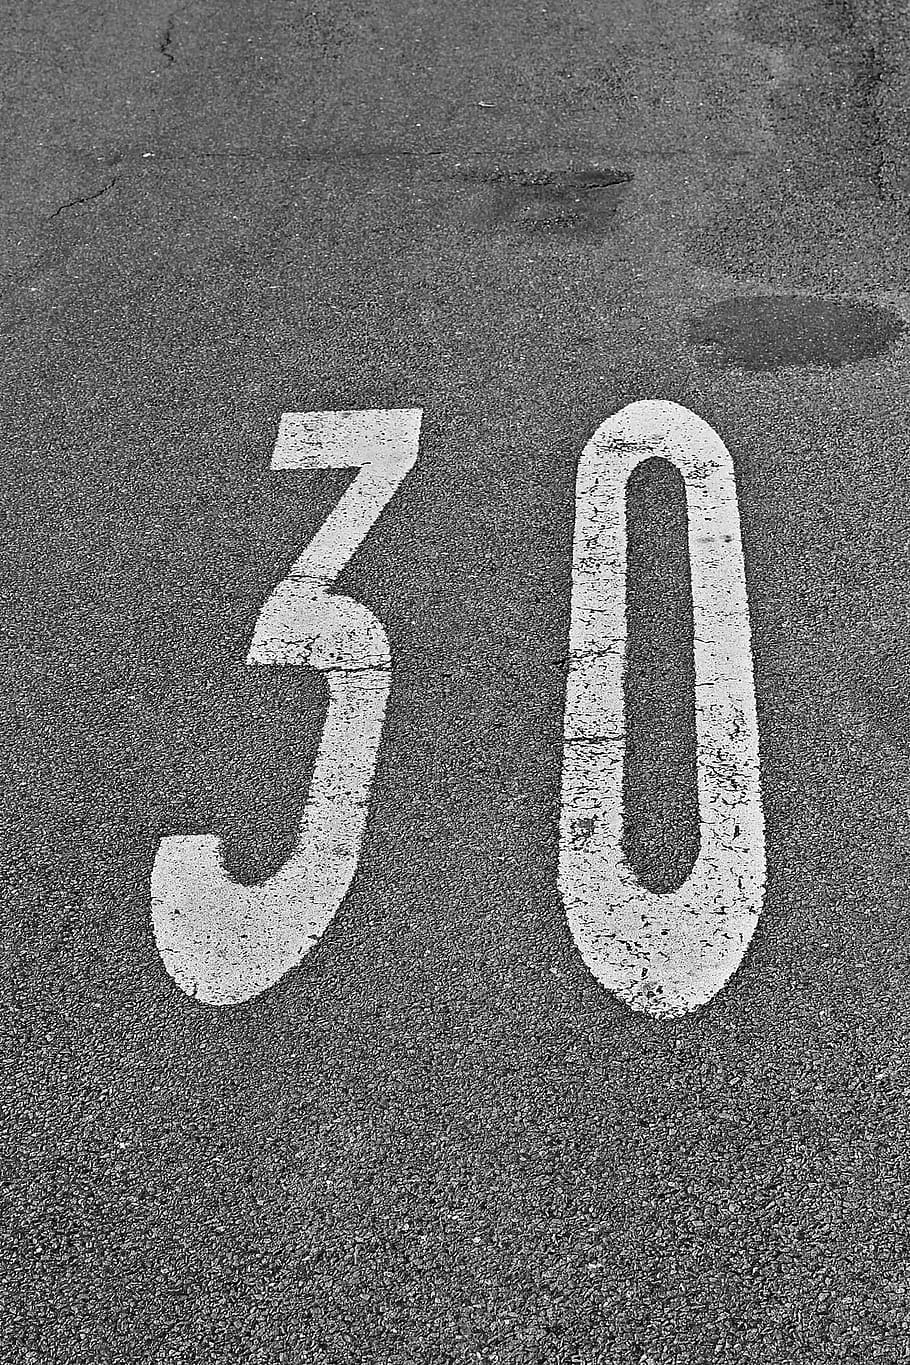 thirty, number, speed, kmh, street sign, road, traffic, digit